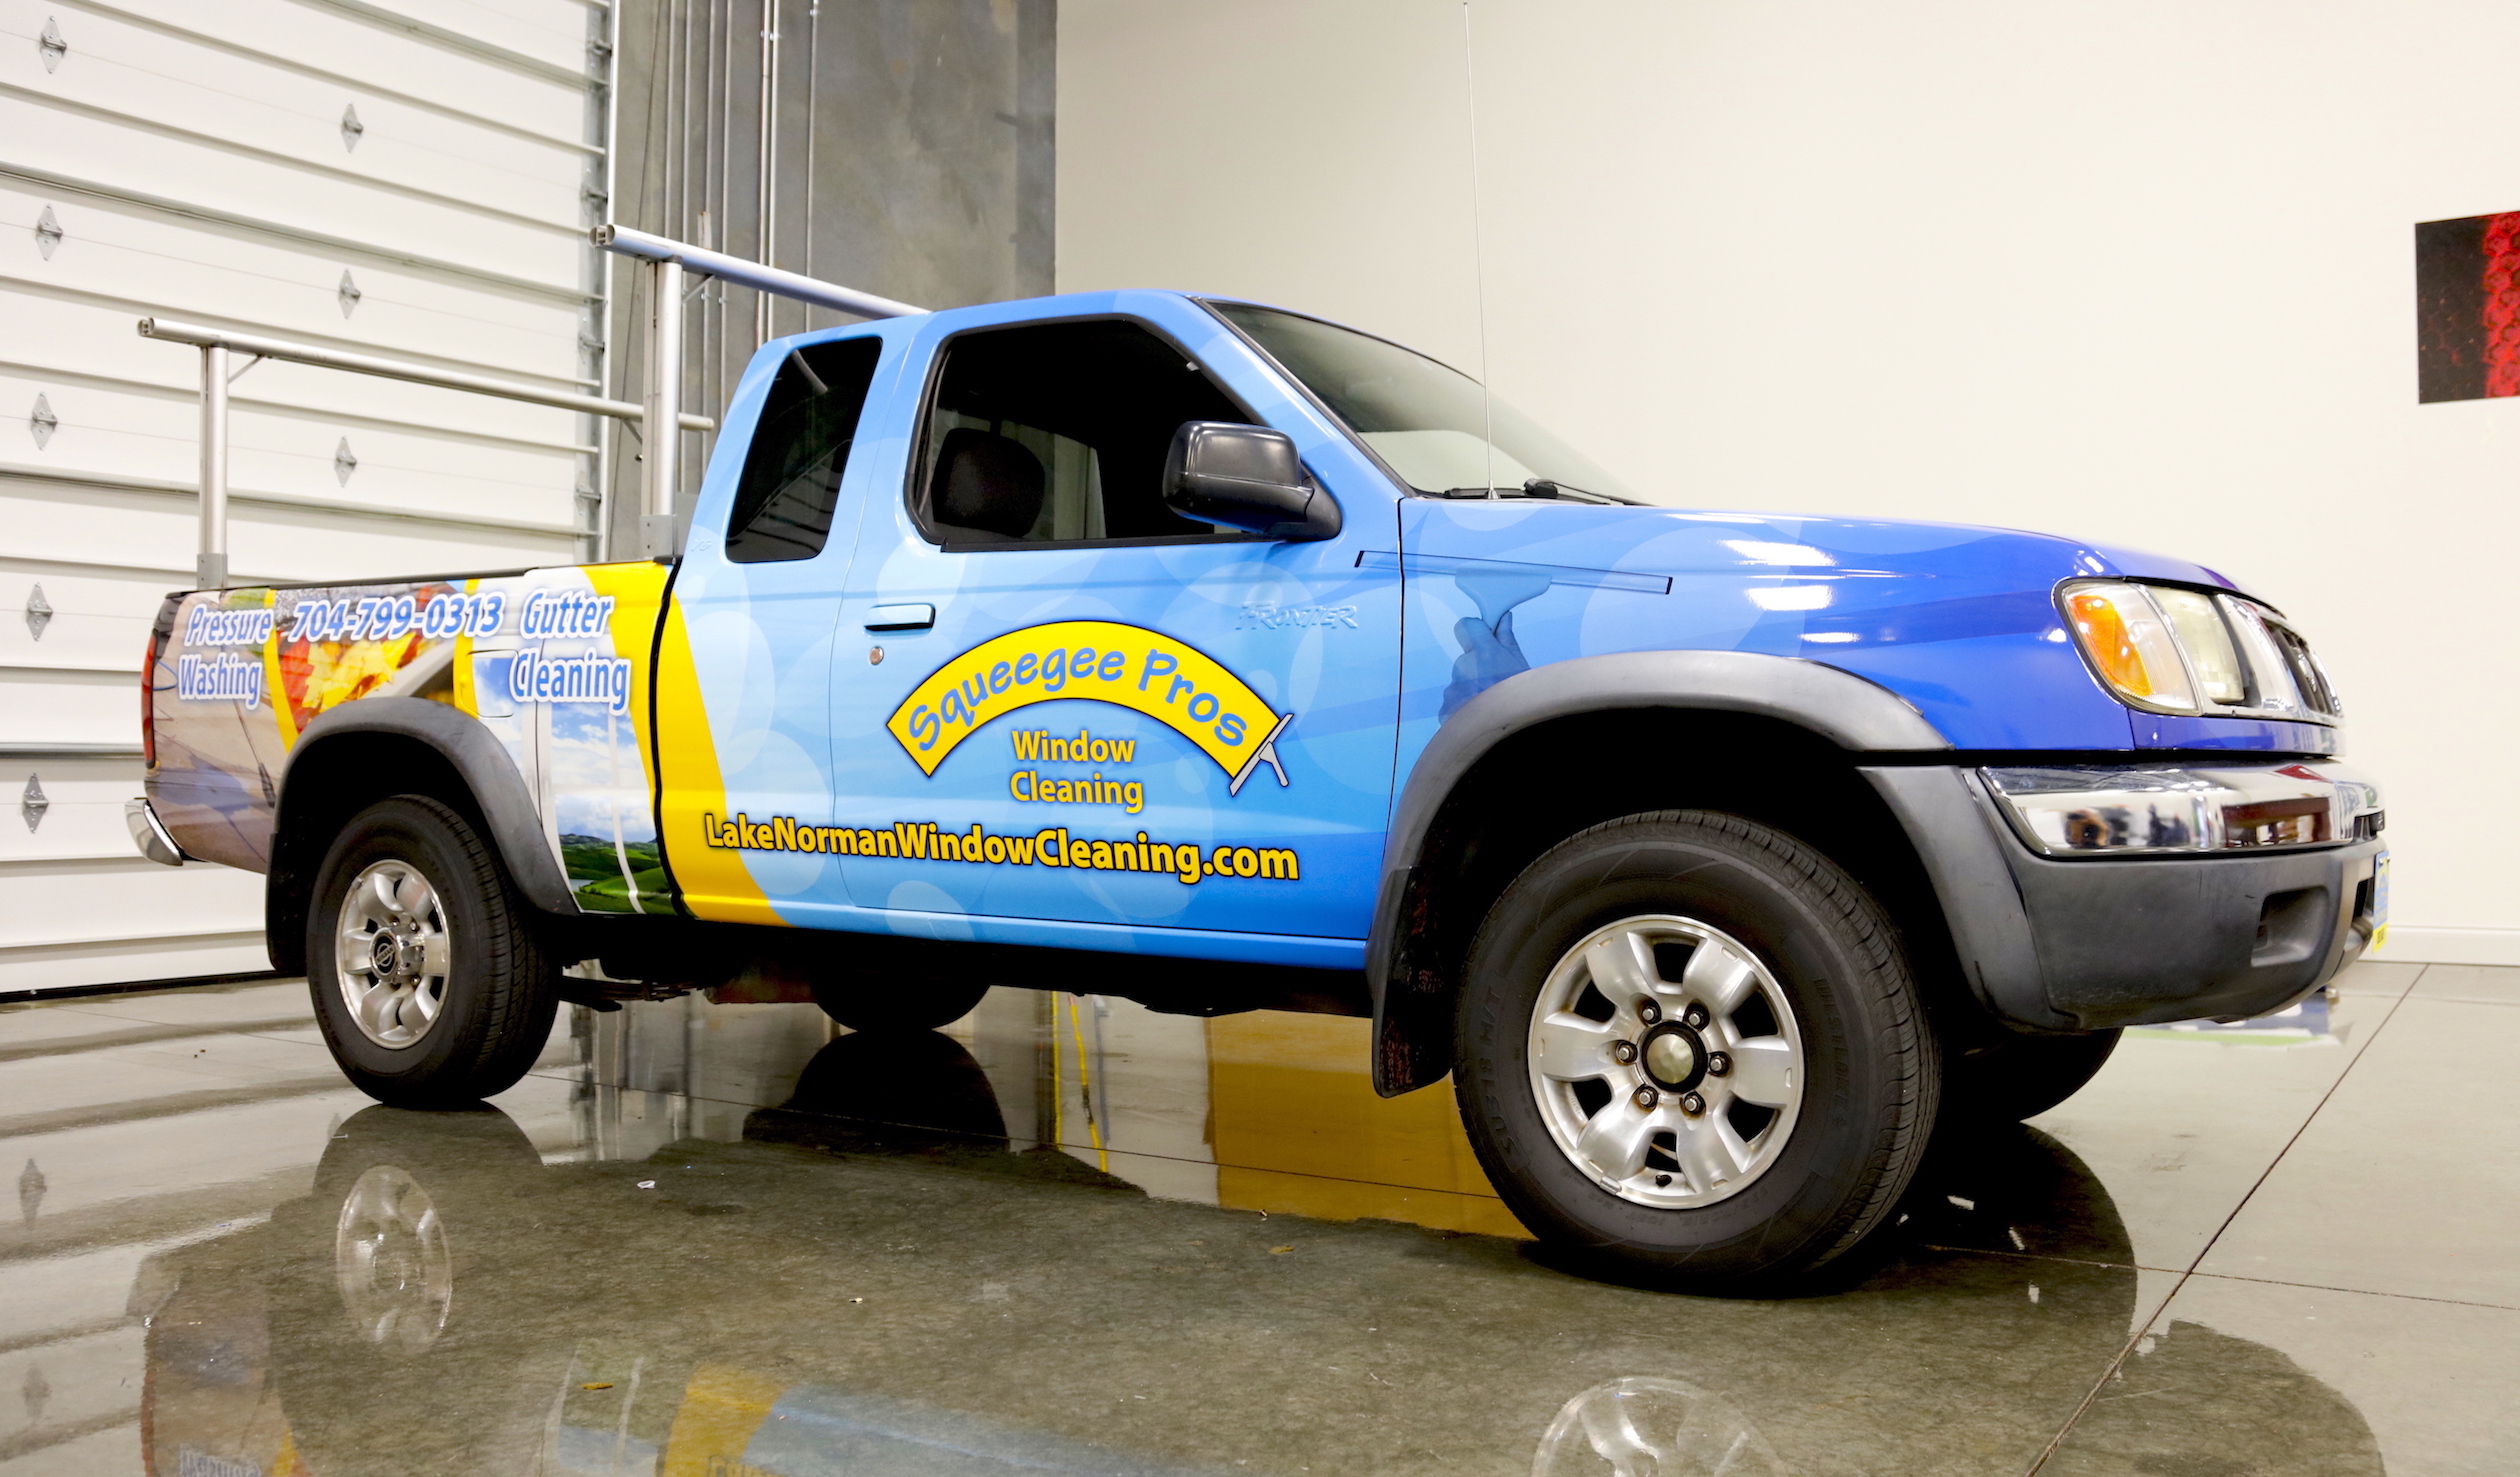 Squeegee Pros blue and yellow printed truck vehicle wrap